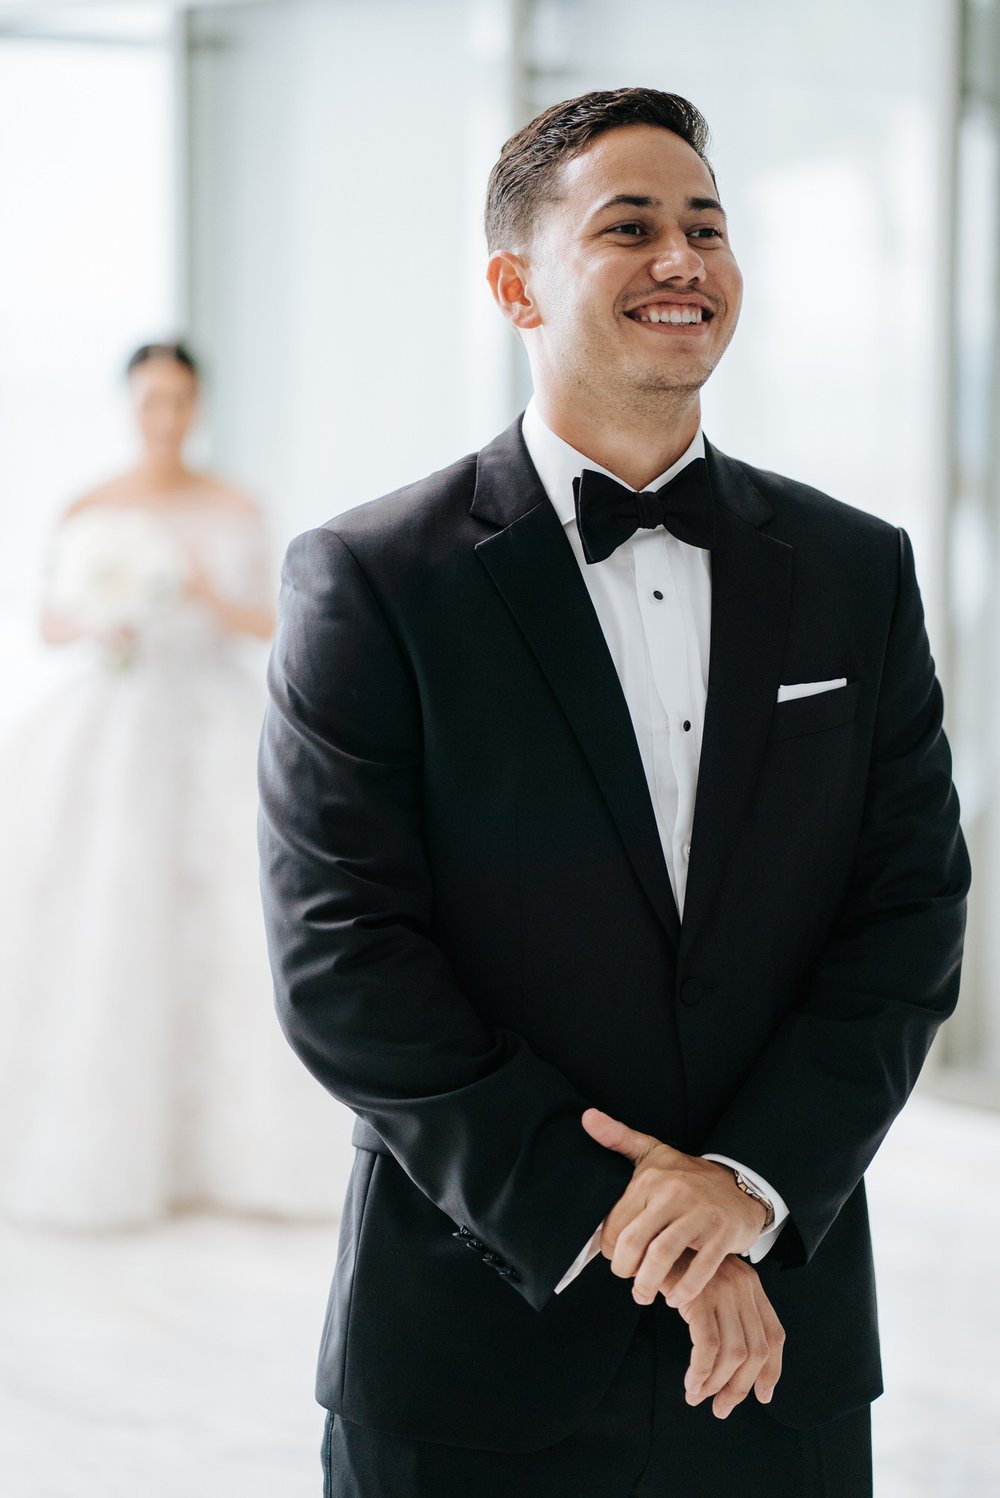 Groom, in foreground, stands excitedly with hands clasped as bride, out of focus, starts approaching him for the first look